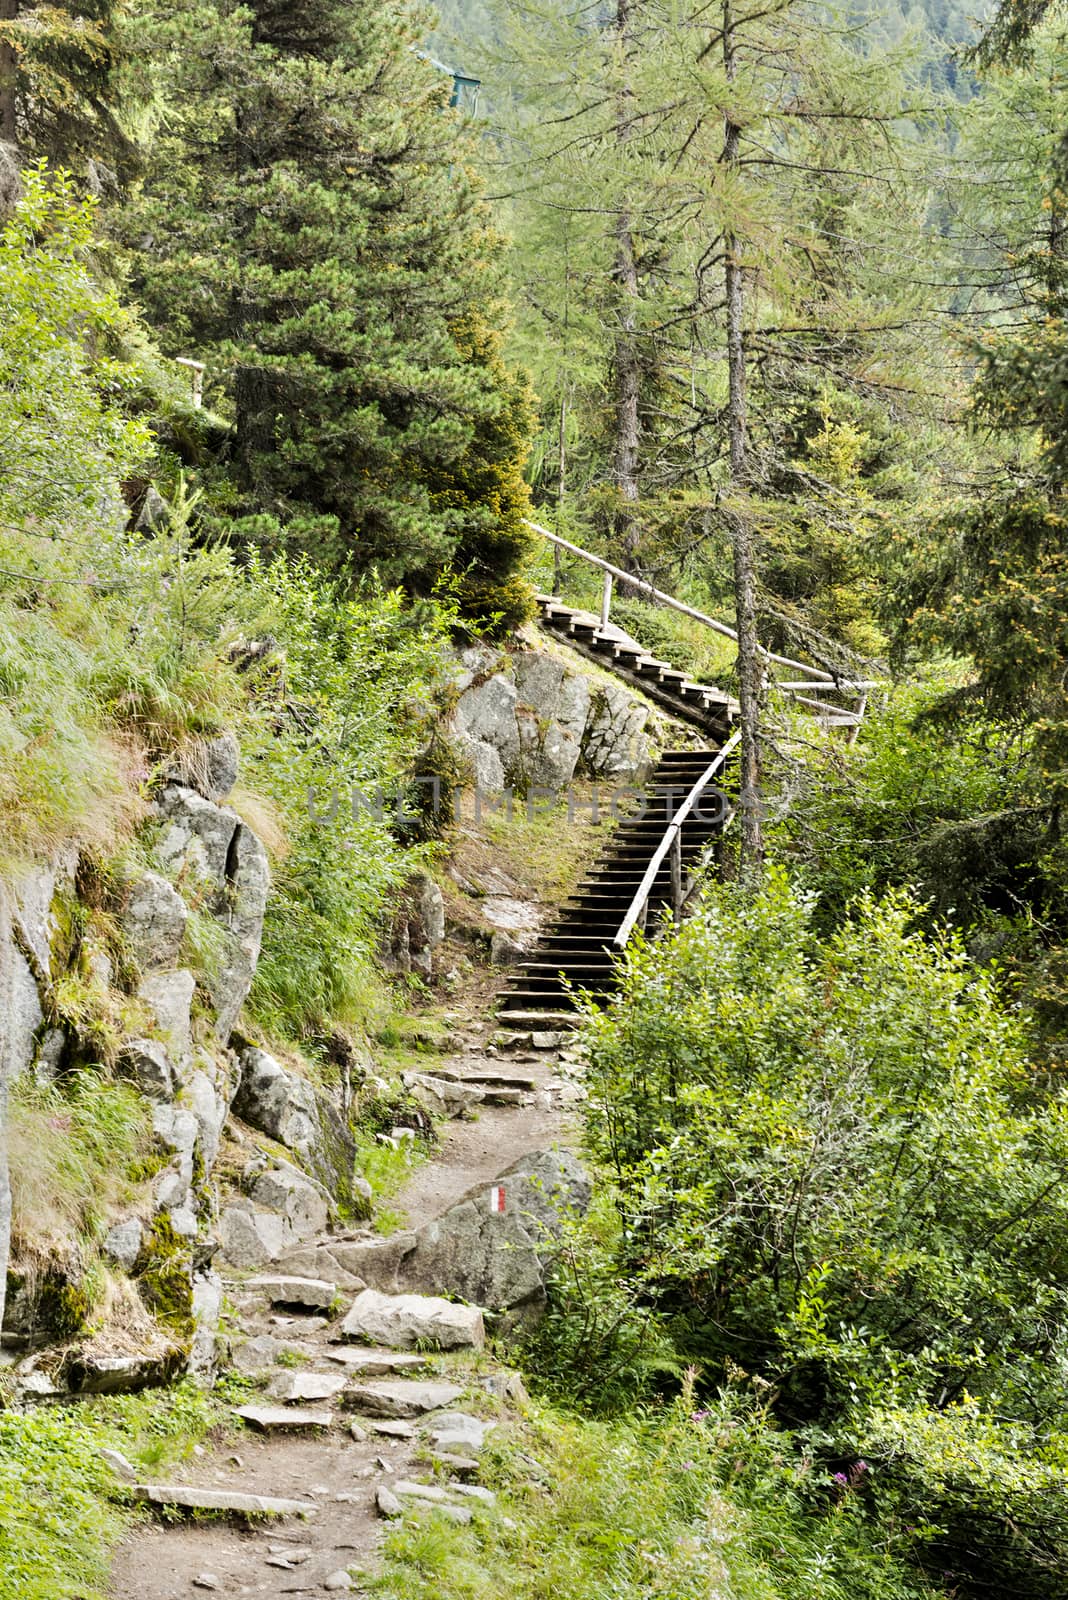 mountain path with stair in the forest, Dolomites - Trentino, Italy